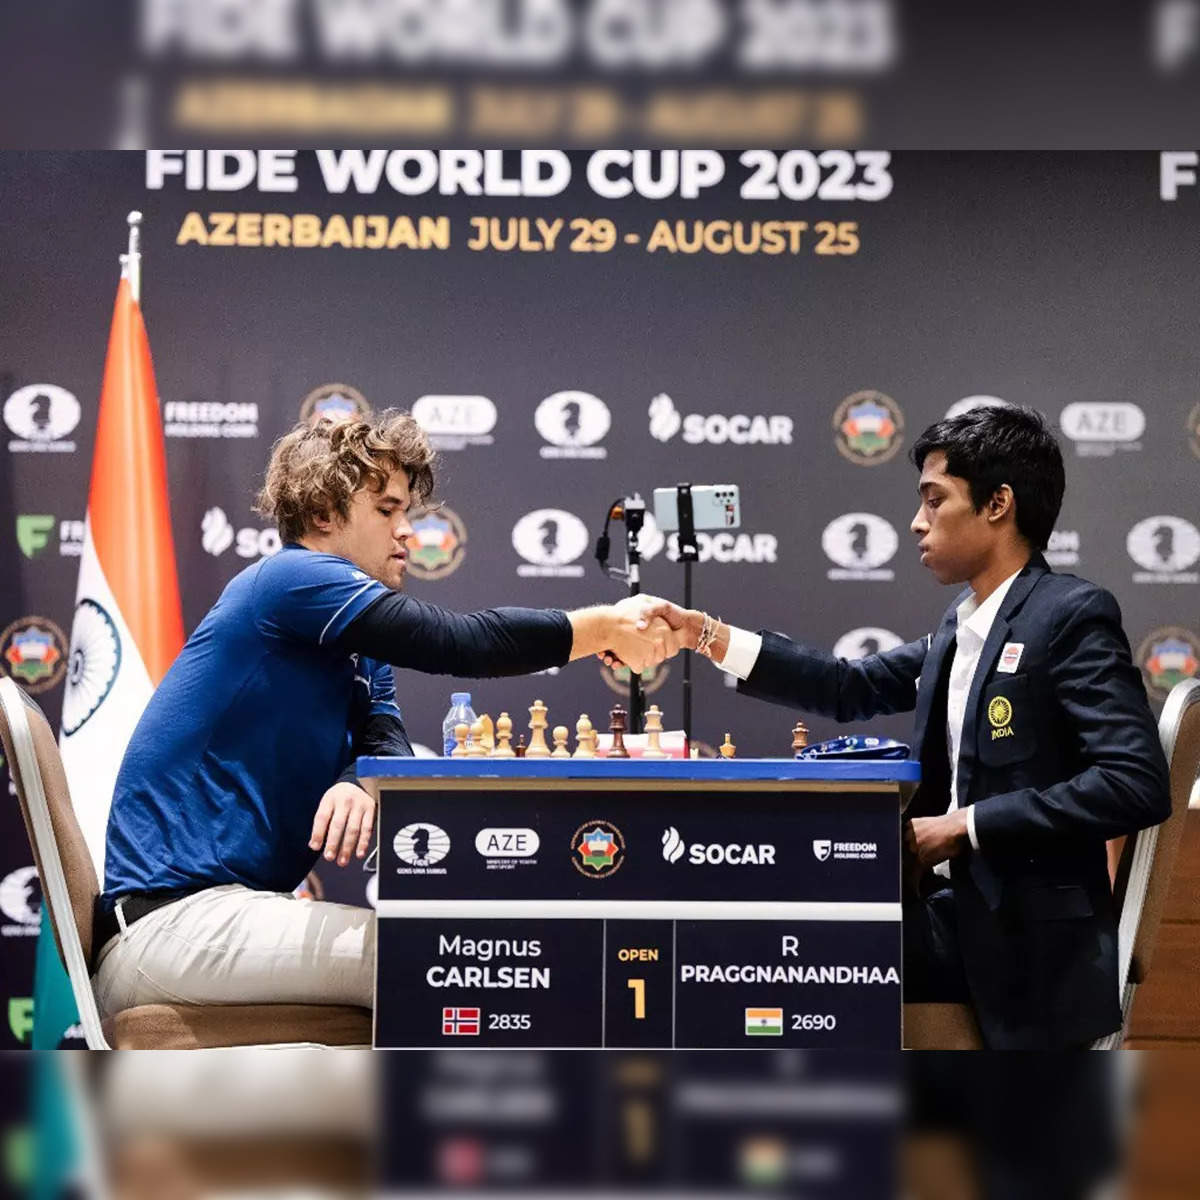 Norway Chess 2023, Overall Standings Through Round 8 : r/chess